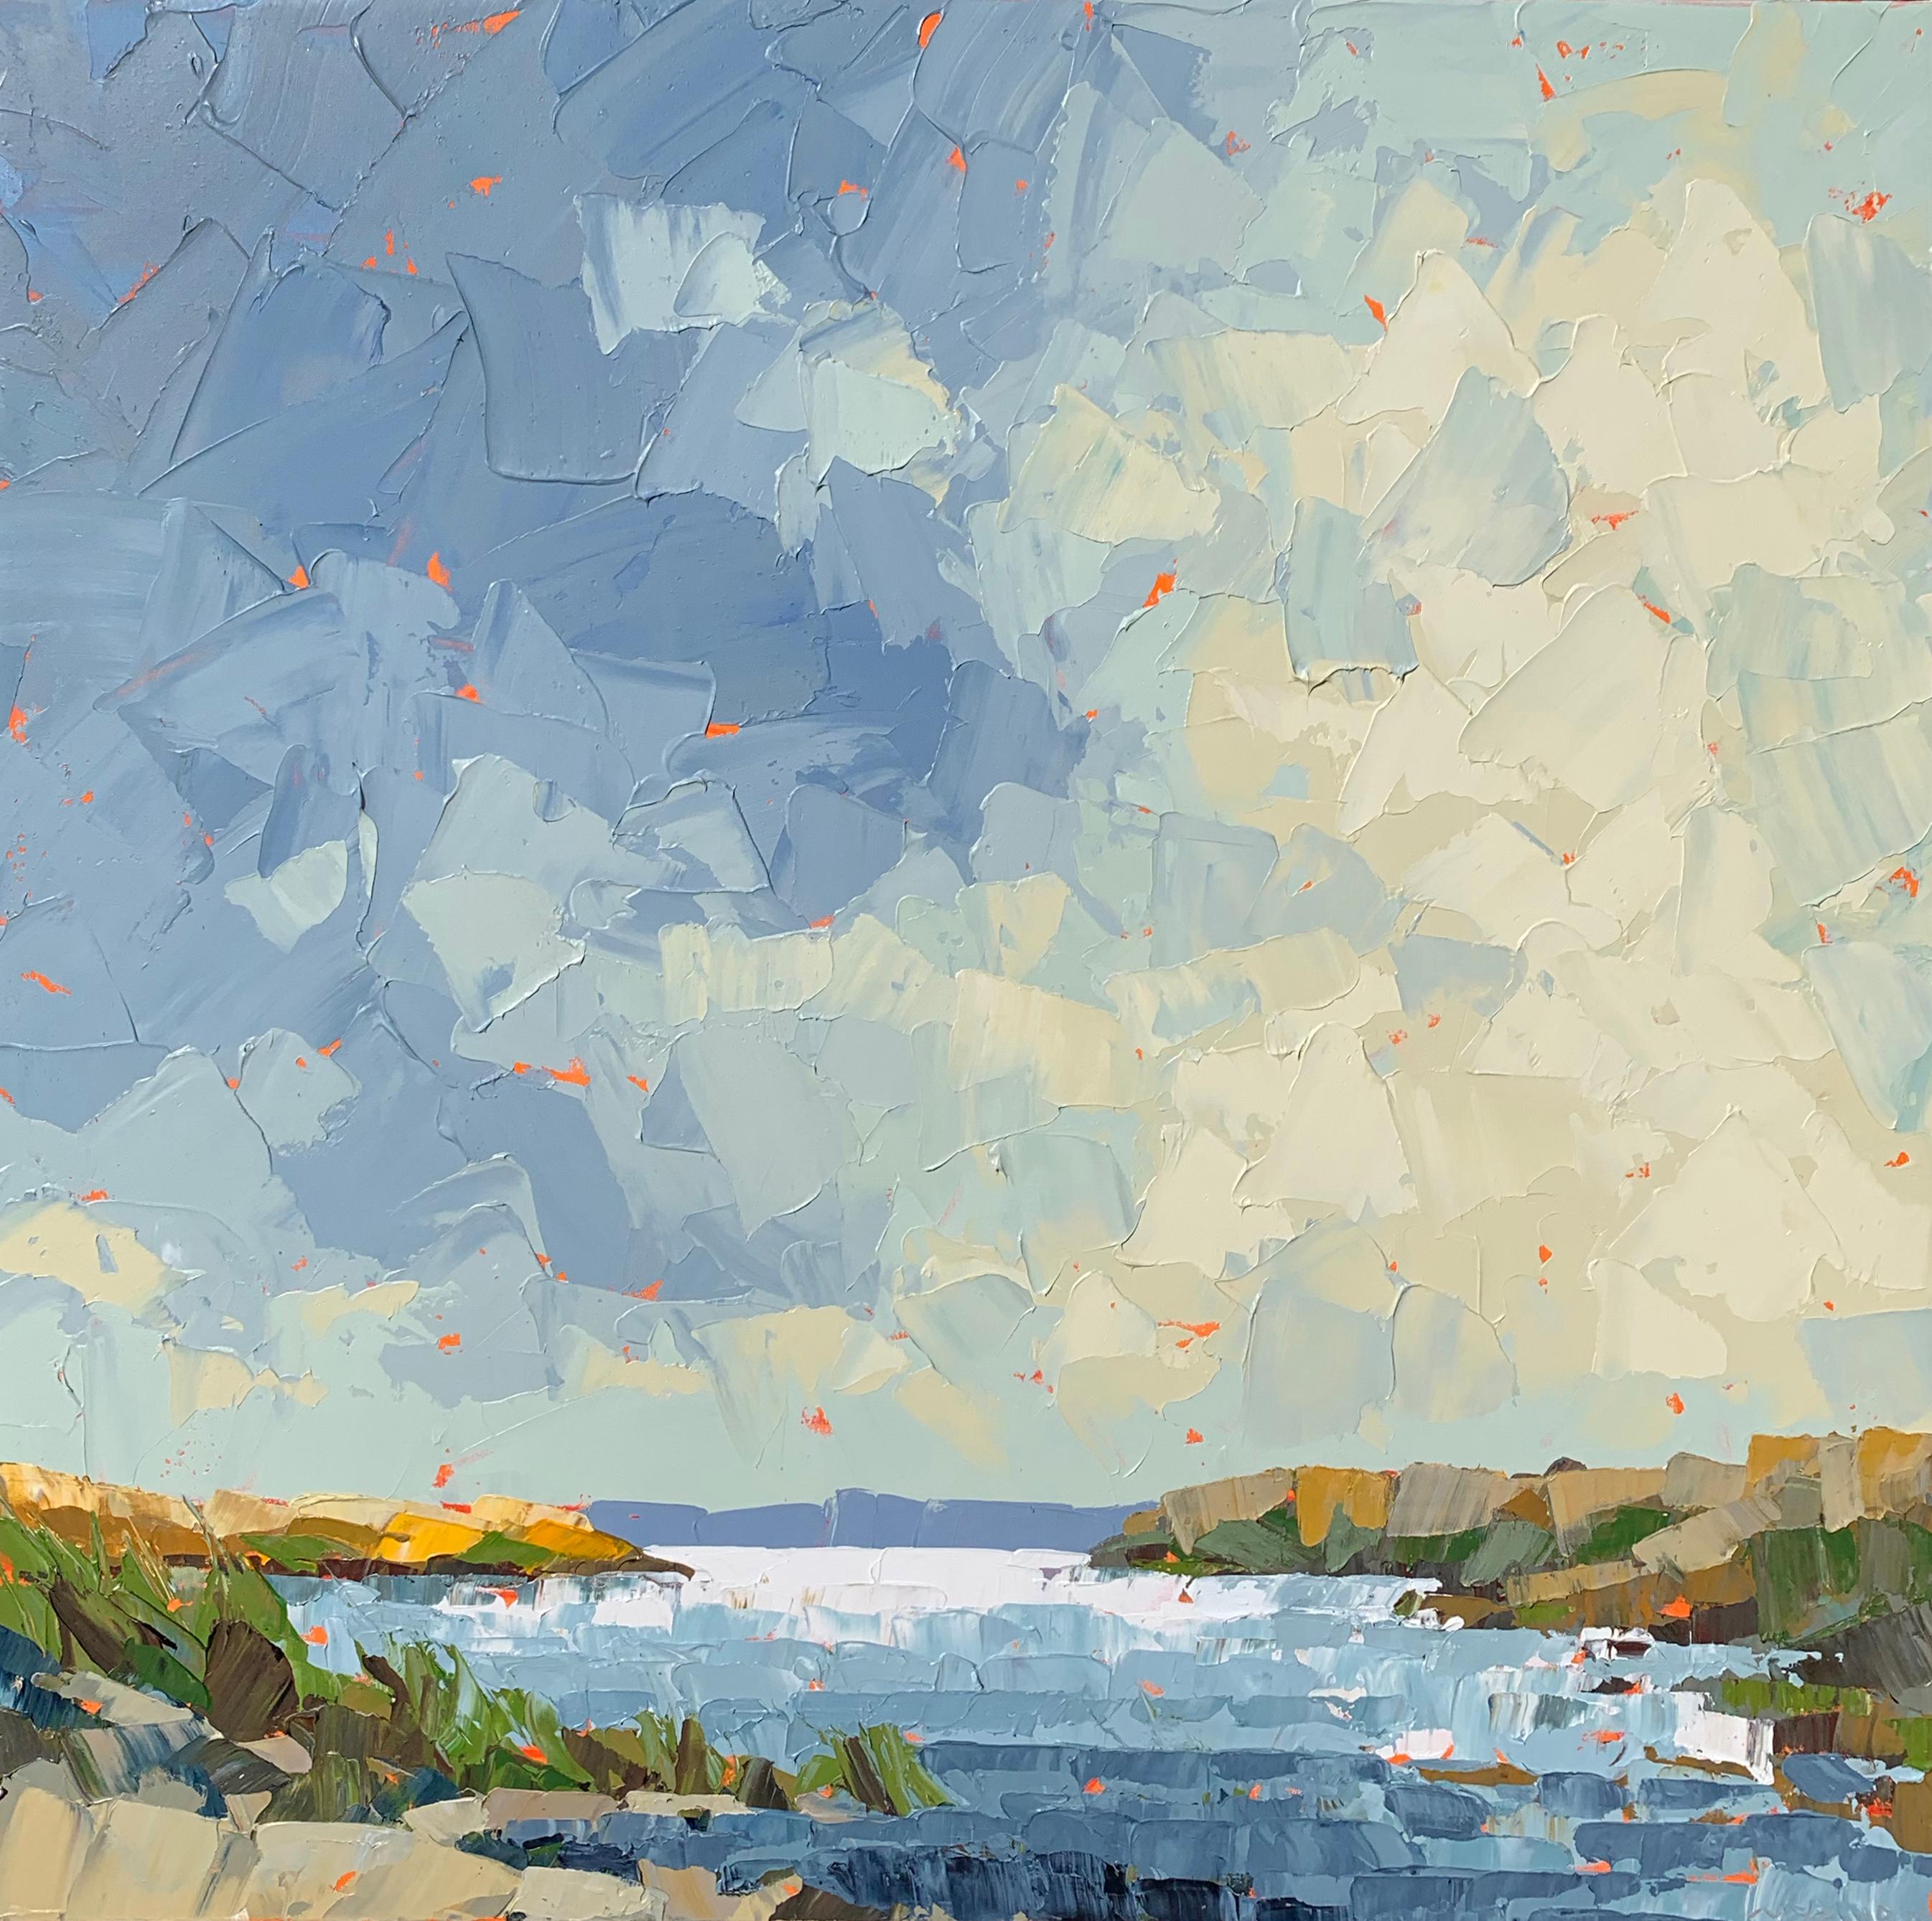 Paul Norwood Landscape Painting - "Pond View" abstract acrylic landscape painting in shades of blue pond clouds